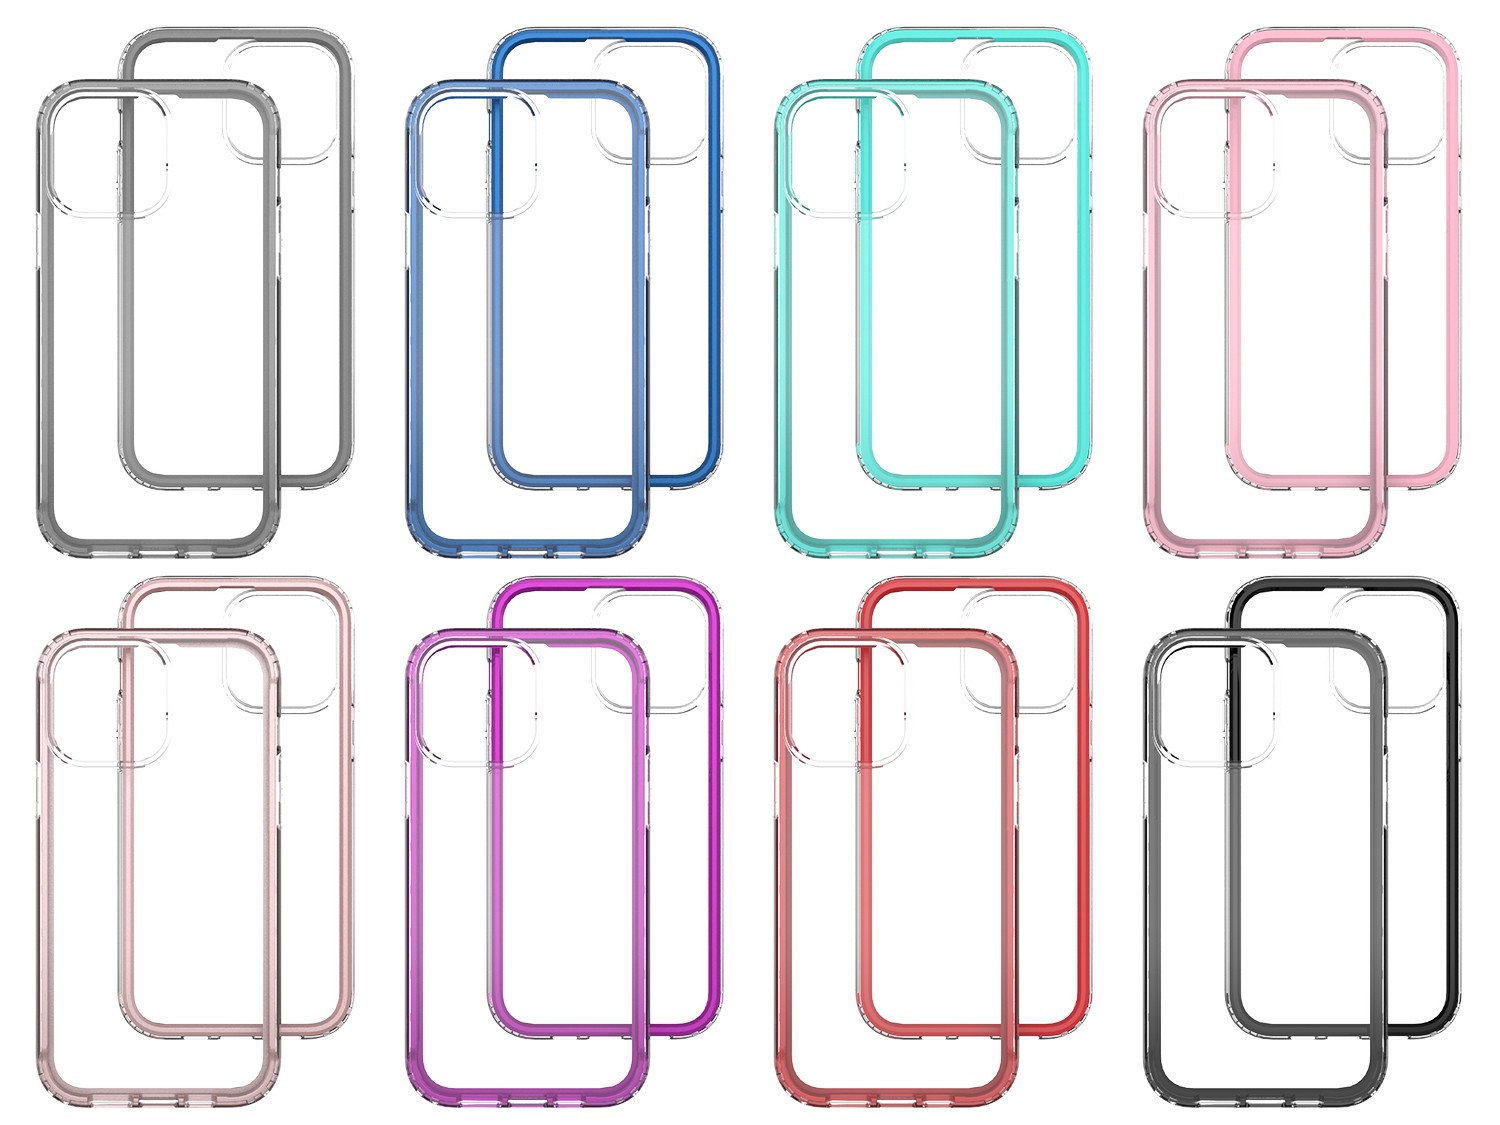 video-Clear Phone Case Crystal Tpu Pc 2 in 1 IPhone Case Colorful Bumper Protective Shockproof Phon